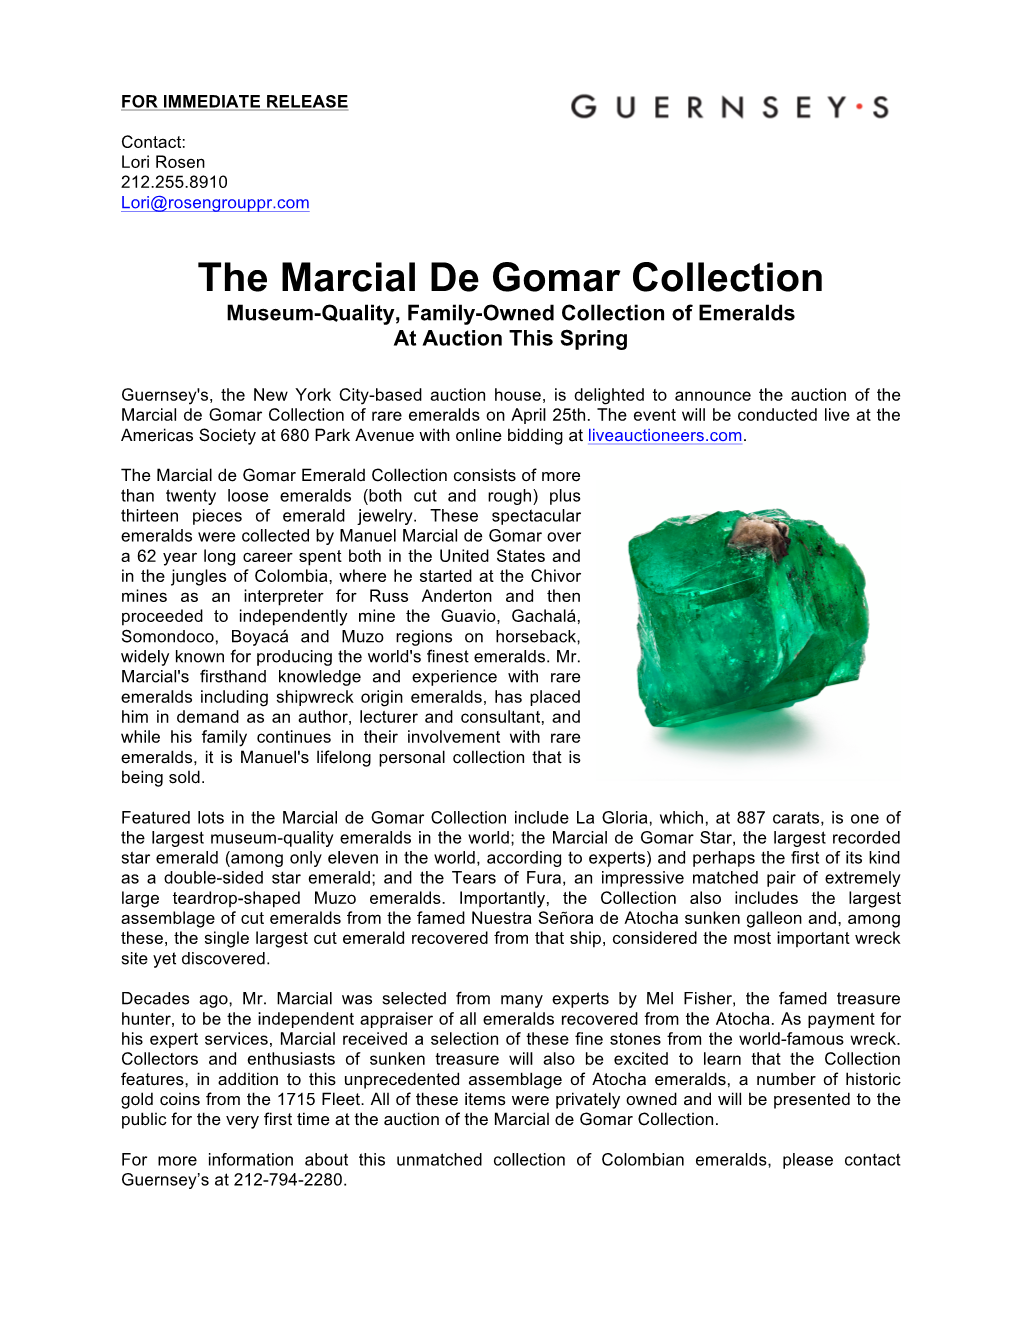 The Marcial De Gomar Collection Museum-Quality, Family-Owned Collection of Emeralds at Auction This Spring